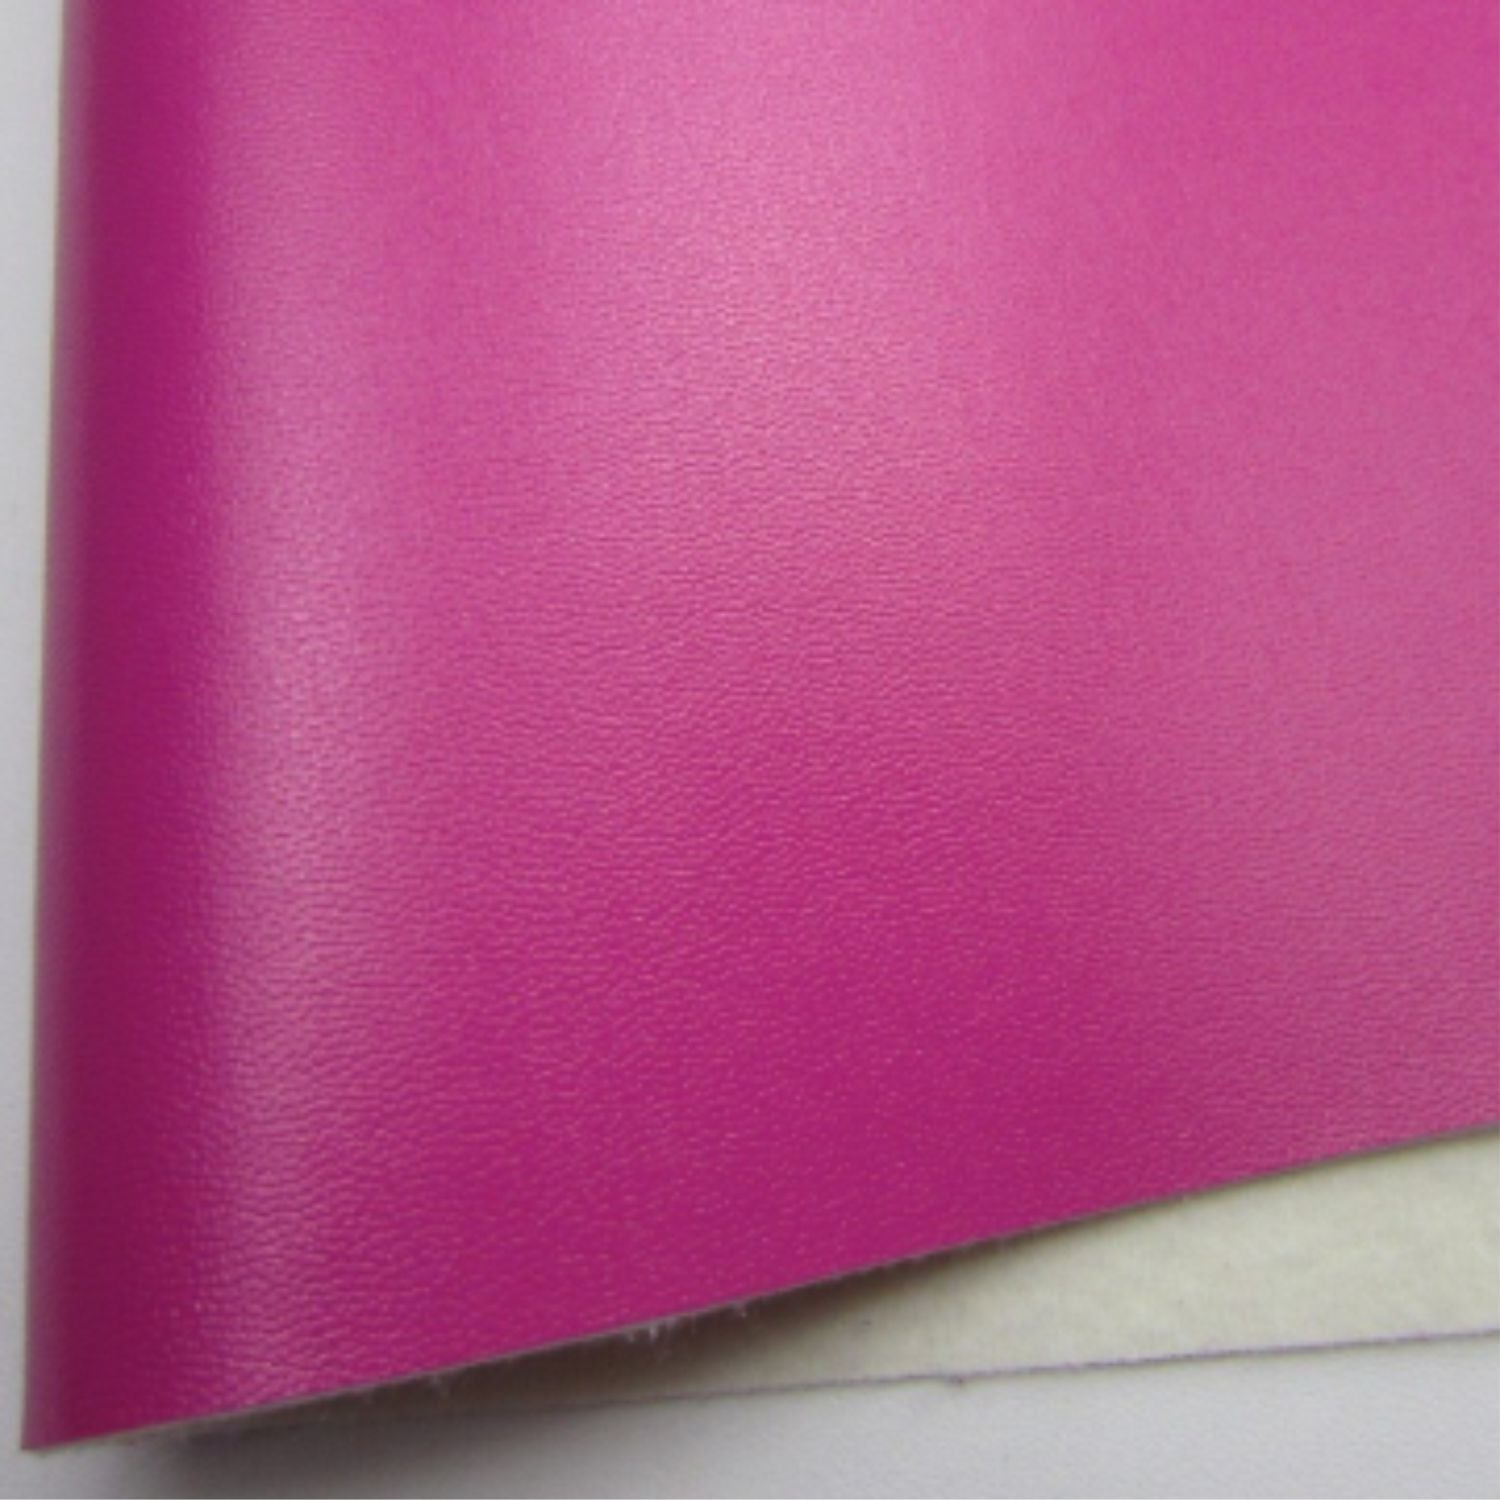 Faux Leather Pink Smooth Fabric Synthetic 11.75in x 12in Sheets